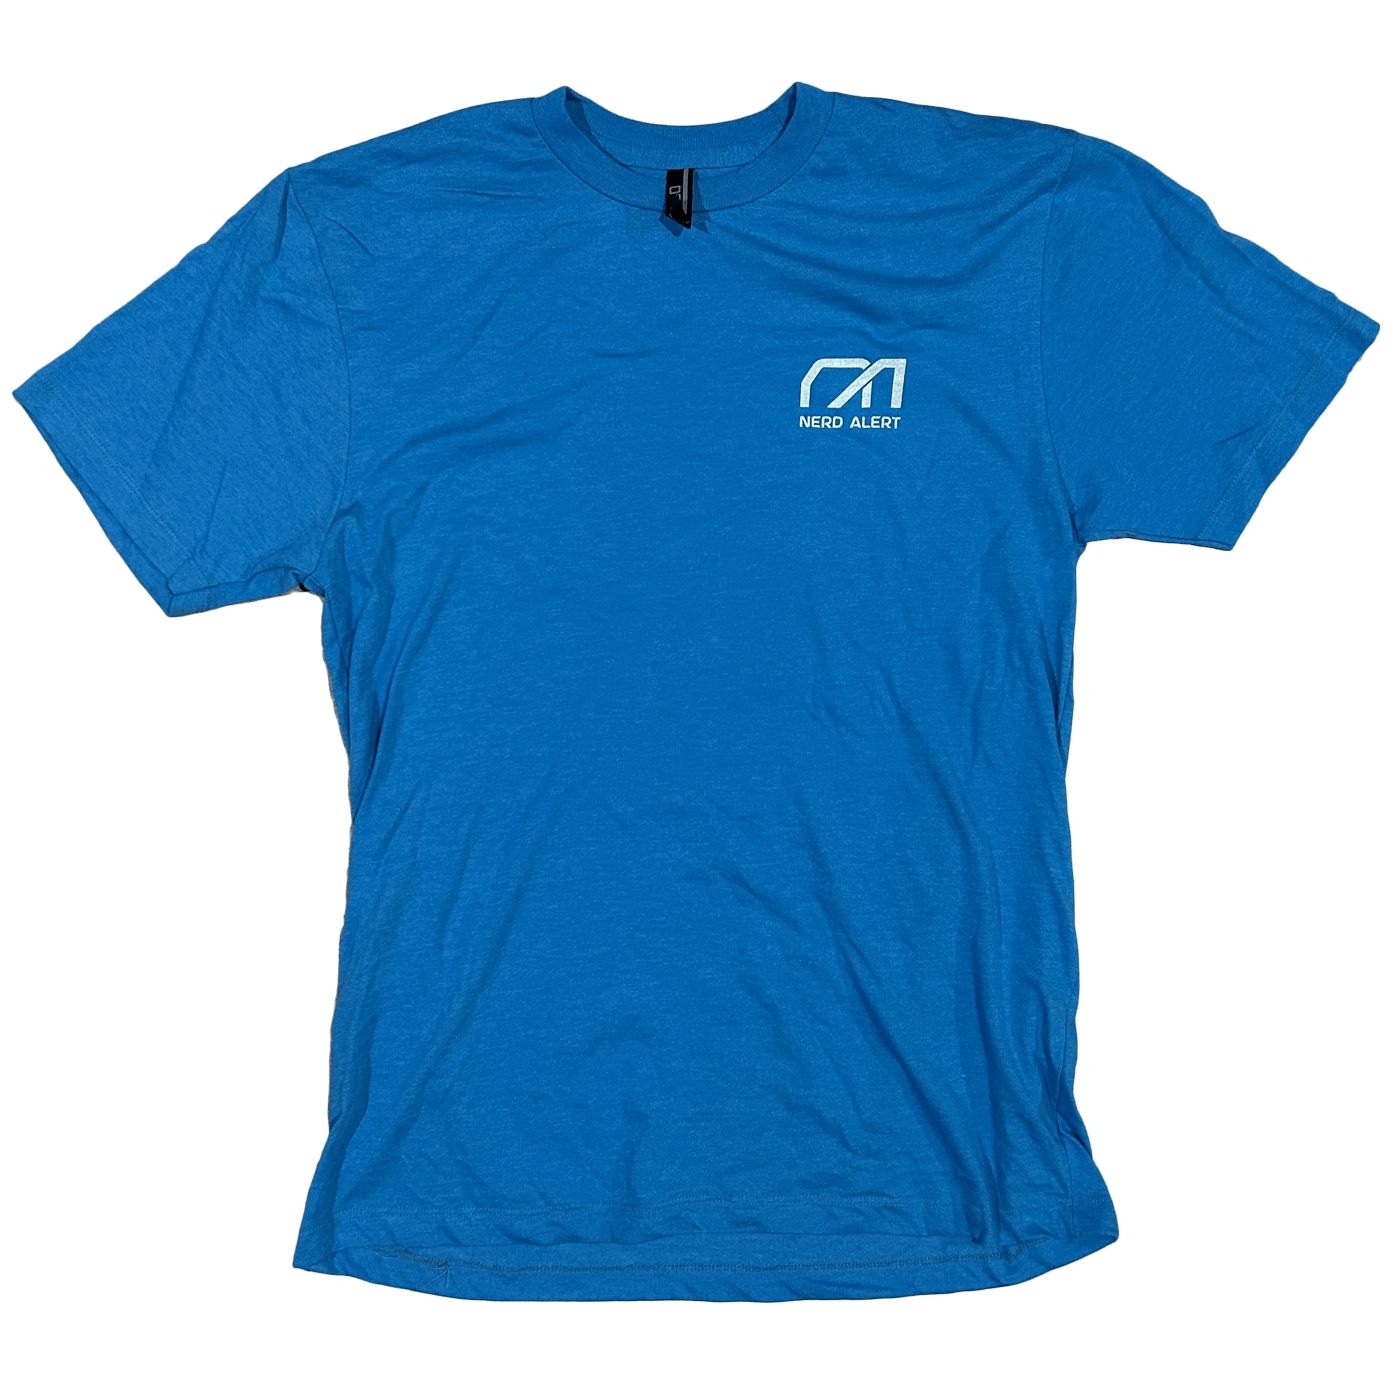 A turquoise T-Shirt with the Nerd Alert logo on the front